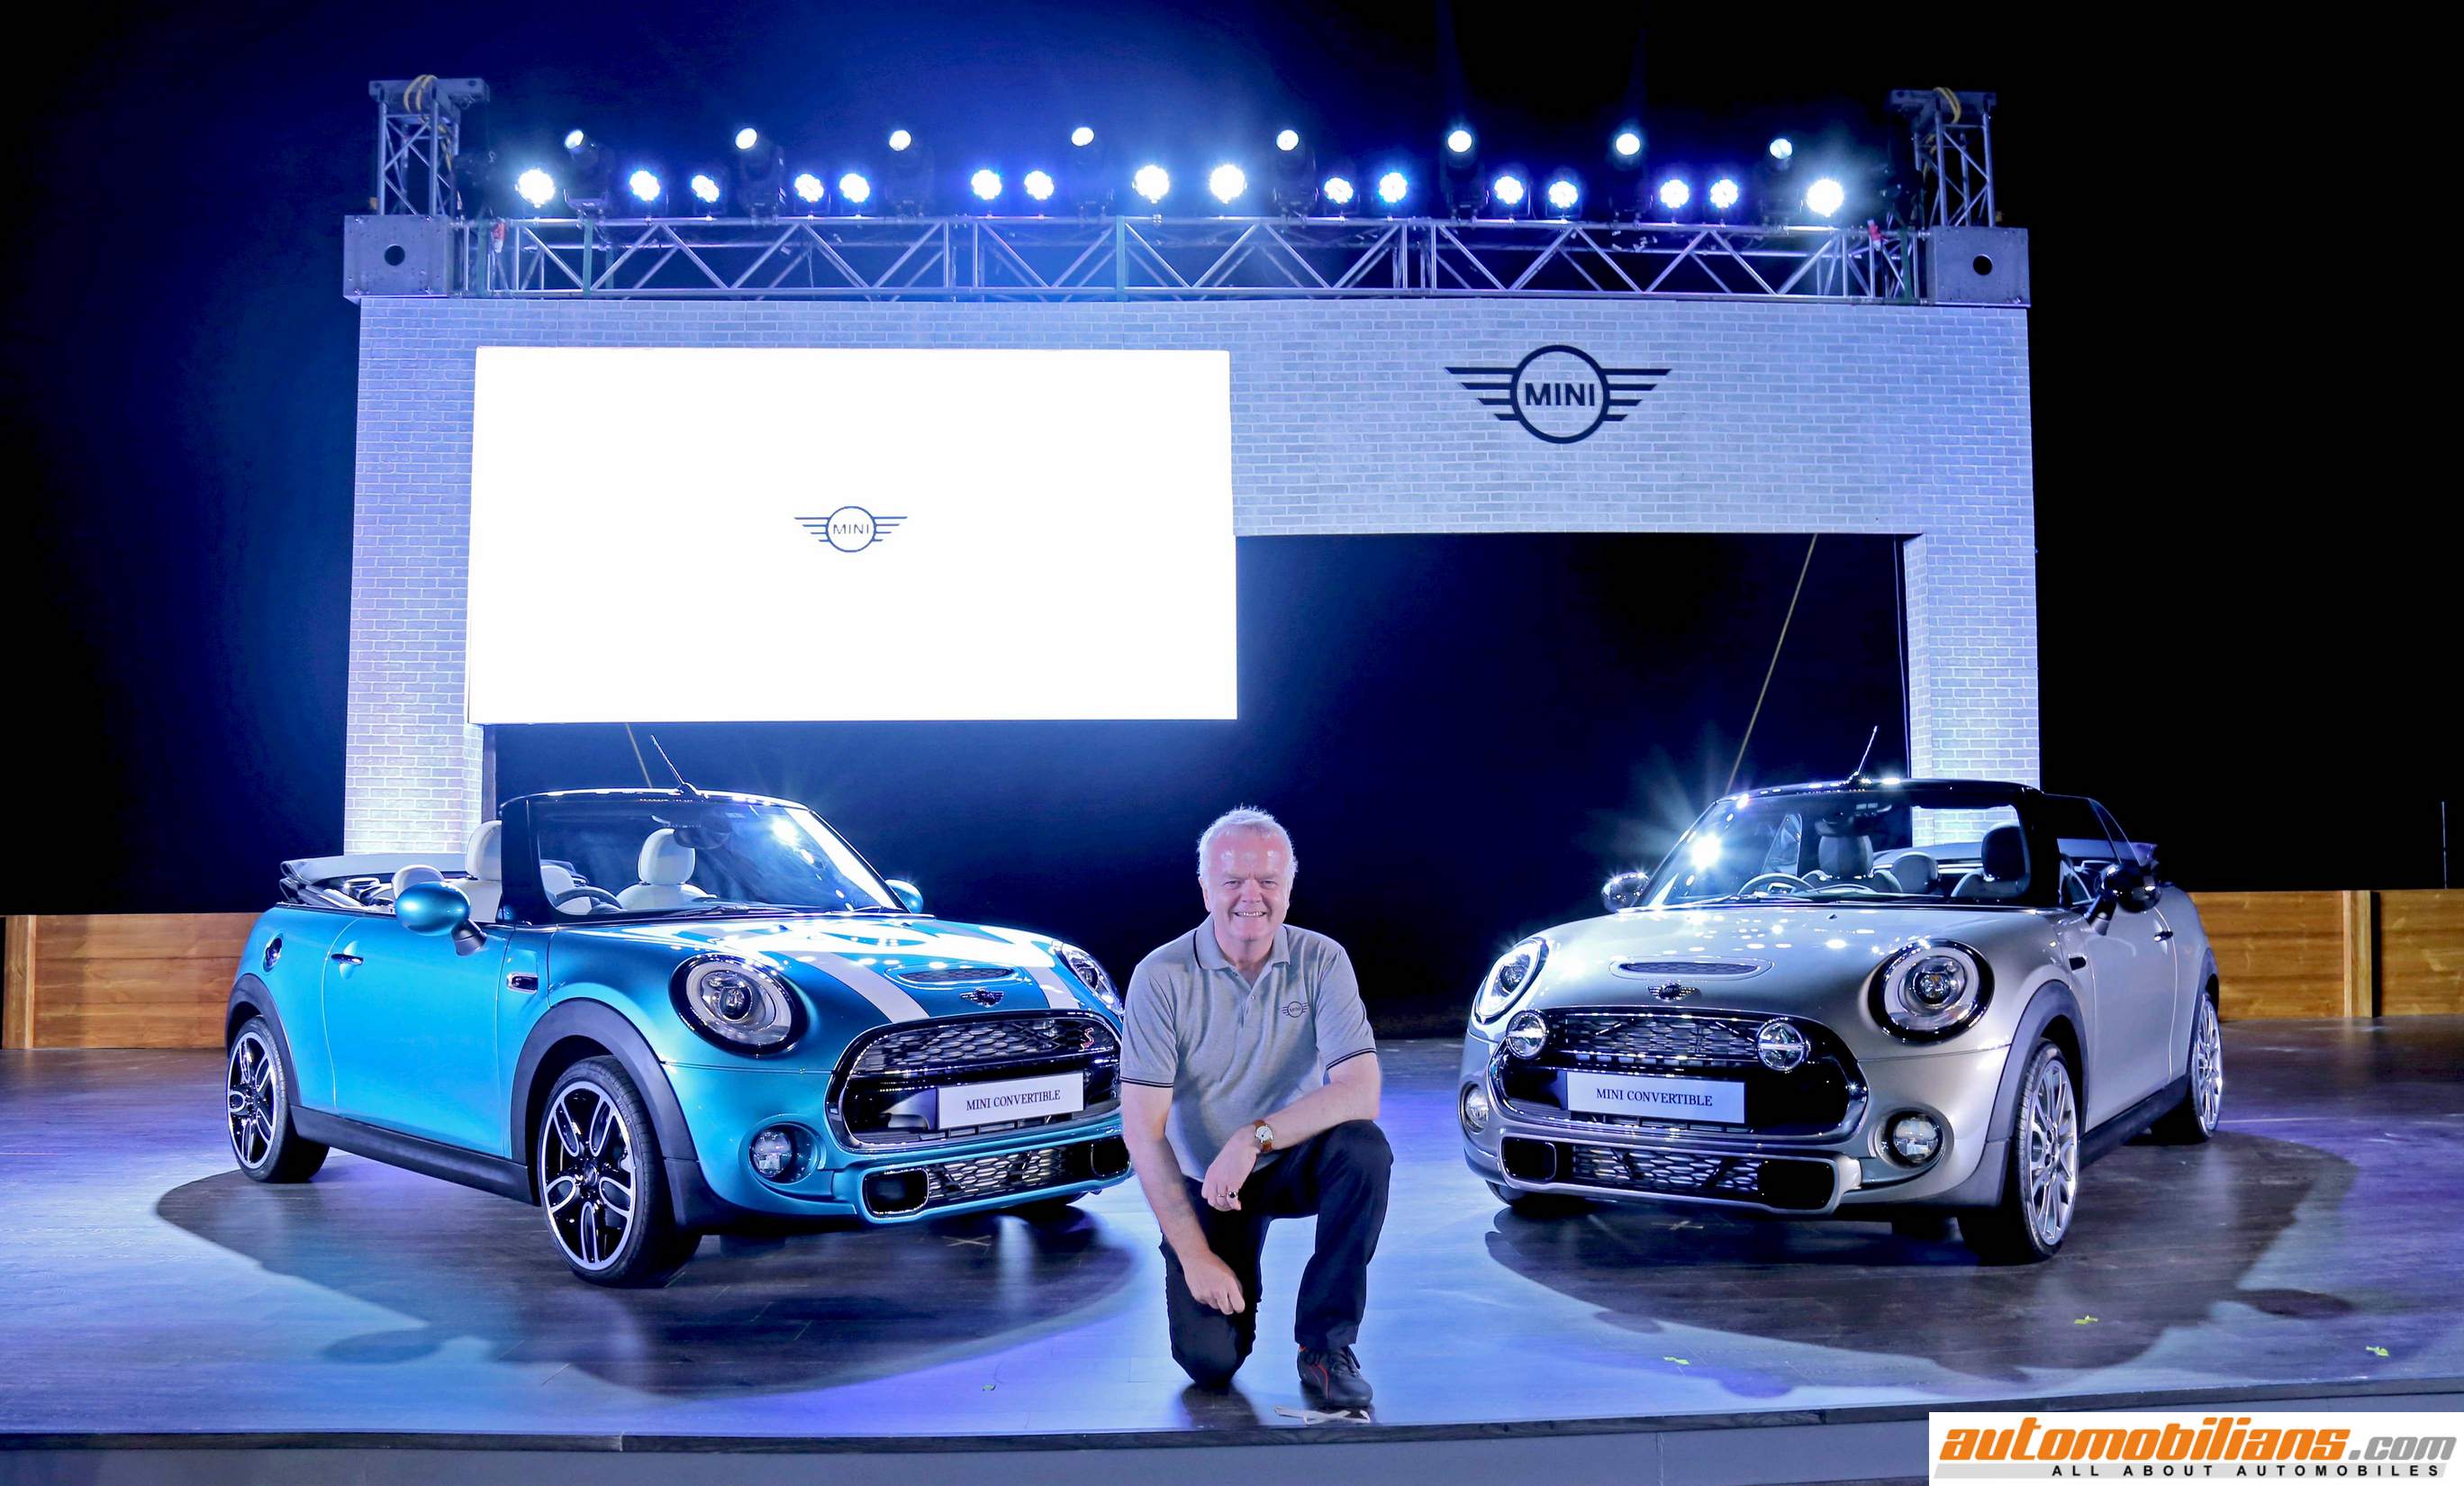 2016 MINI Cooper S Convertible Launched In India At Rs. 34.90 Lakhs (Ex-Showroom)